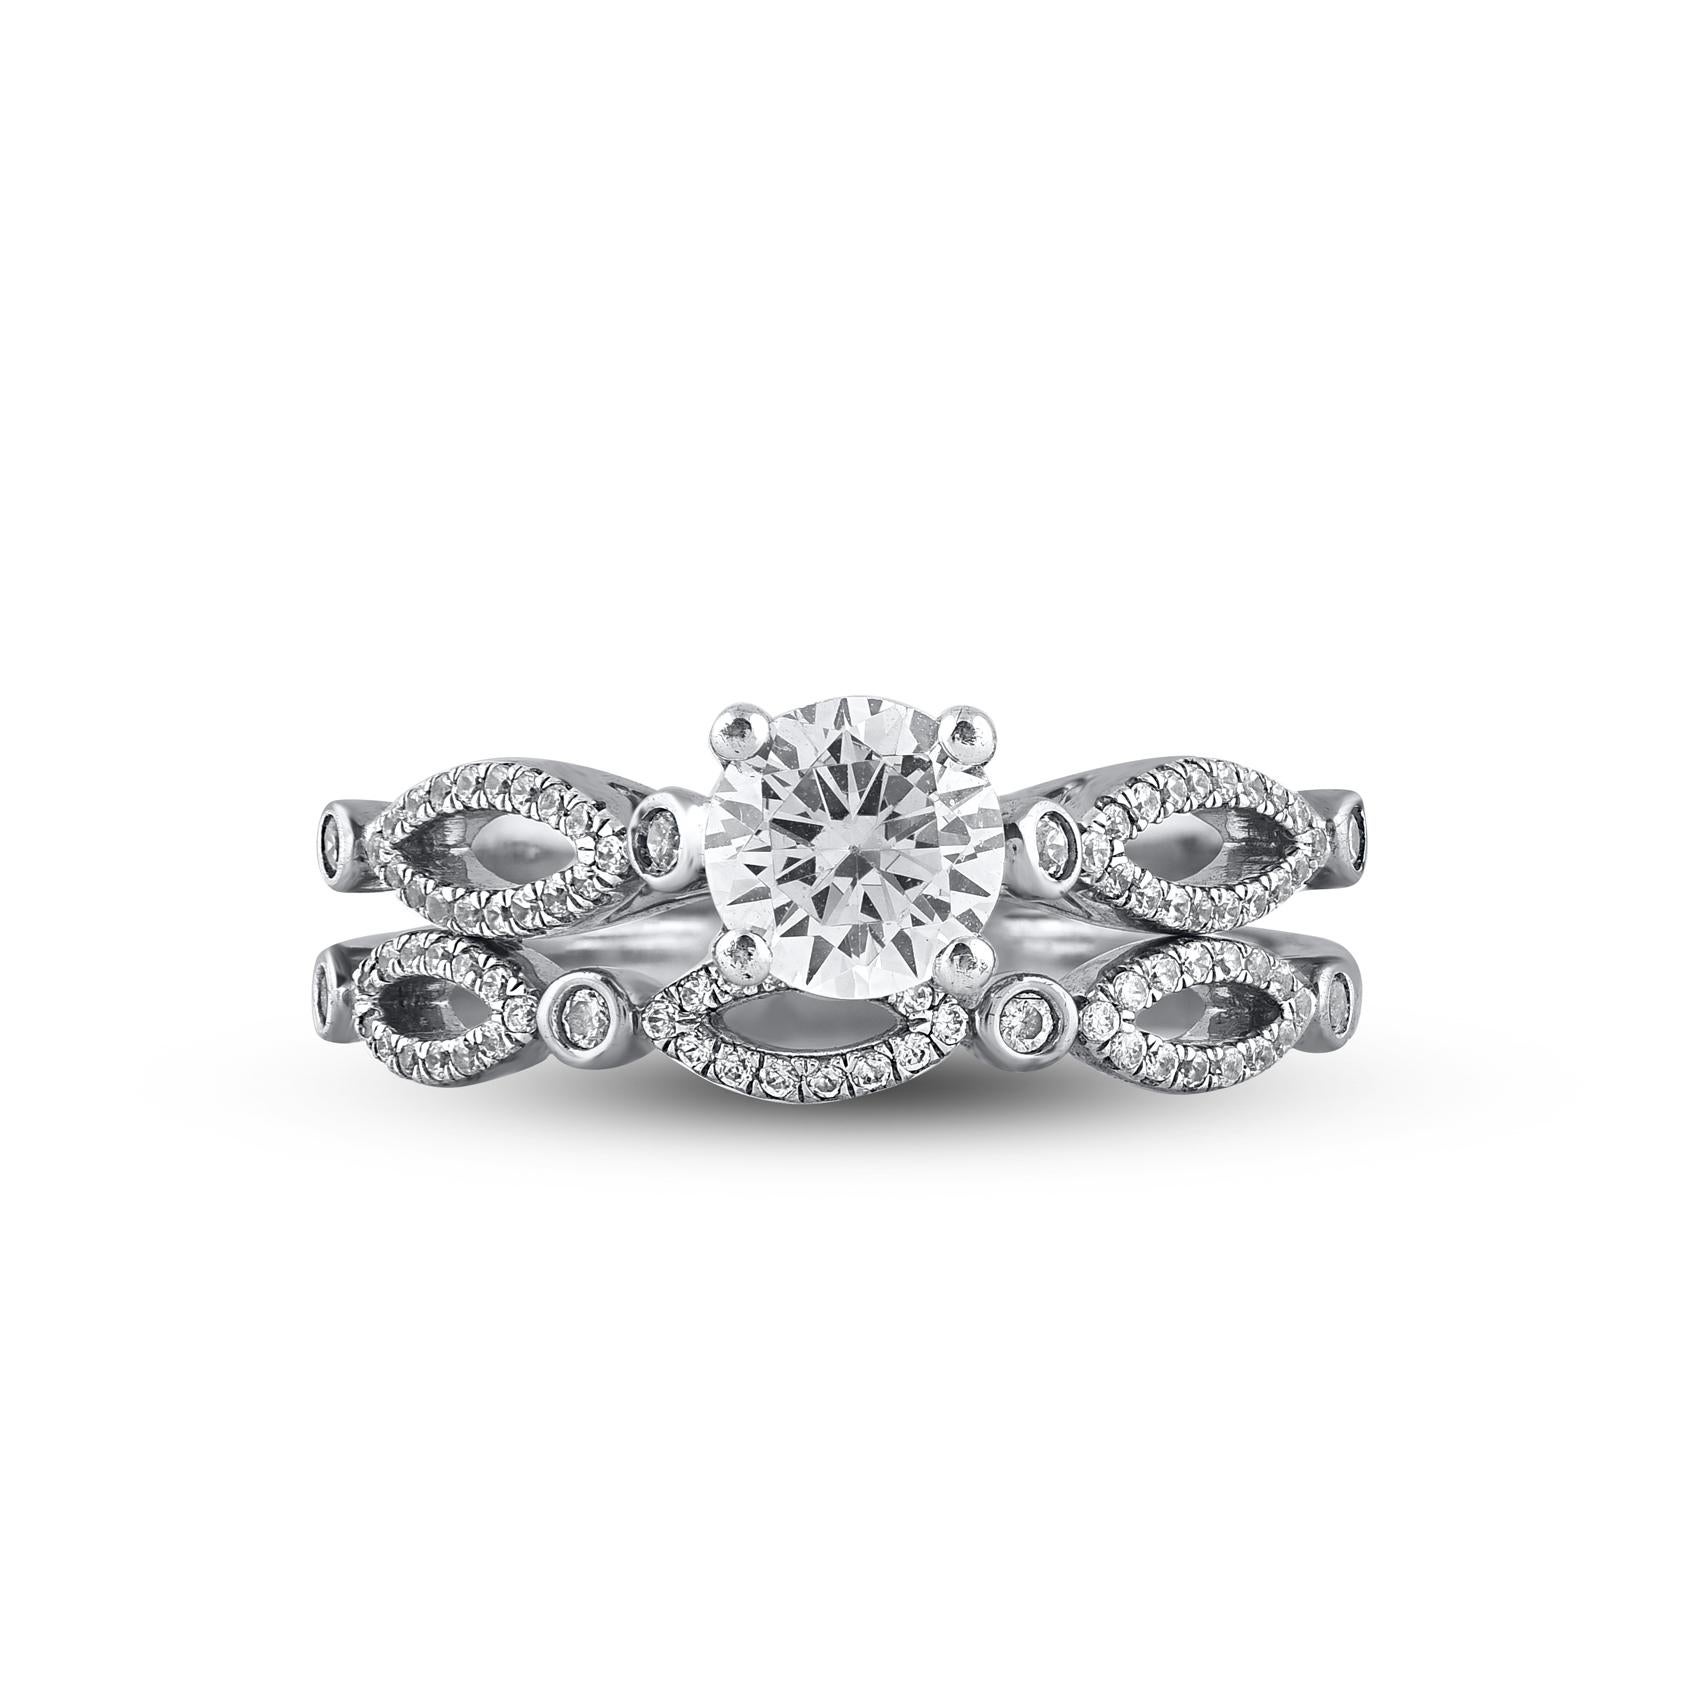 On that special day, express all your love with this elegant and dazzling diamond bridal set. Crafted in 14 Karat white gold. This wedding ring features a sparkling 87 brilliant cut and single cut round diamond beautifully set in prong, pave and